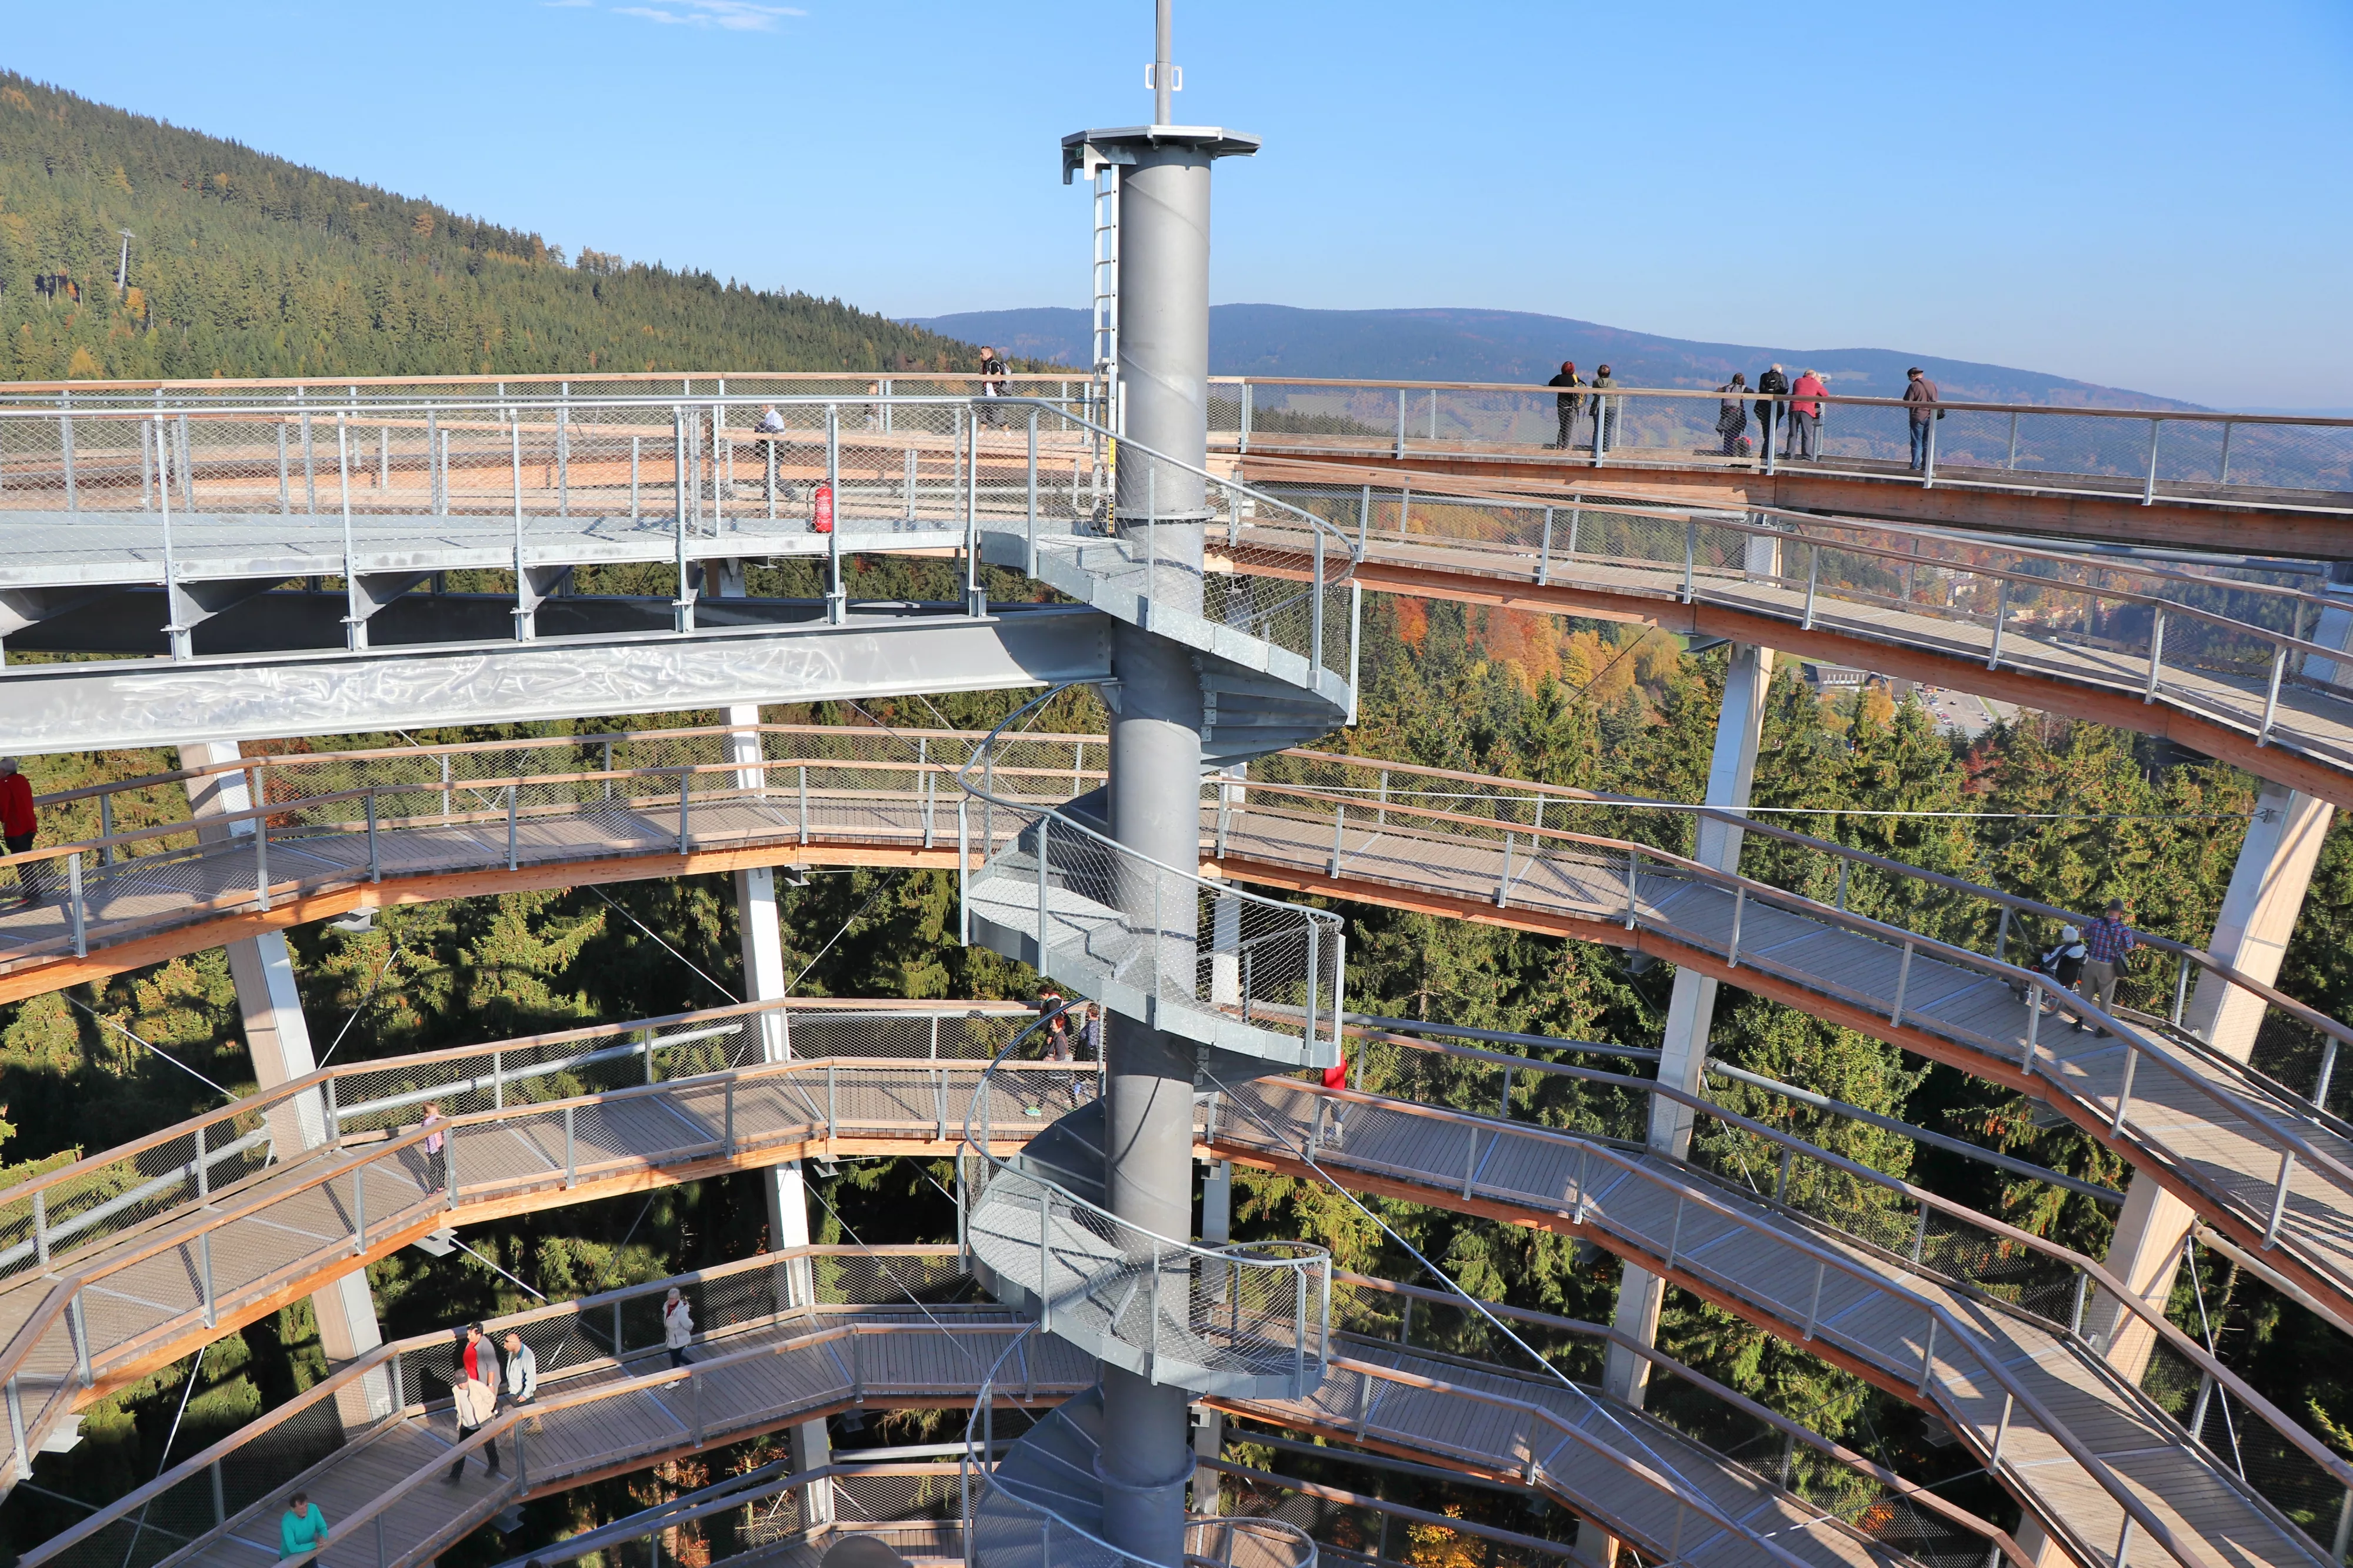 The Timber Trail in Czech Republic, Europe | Observation Decks - Rated 4